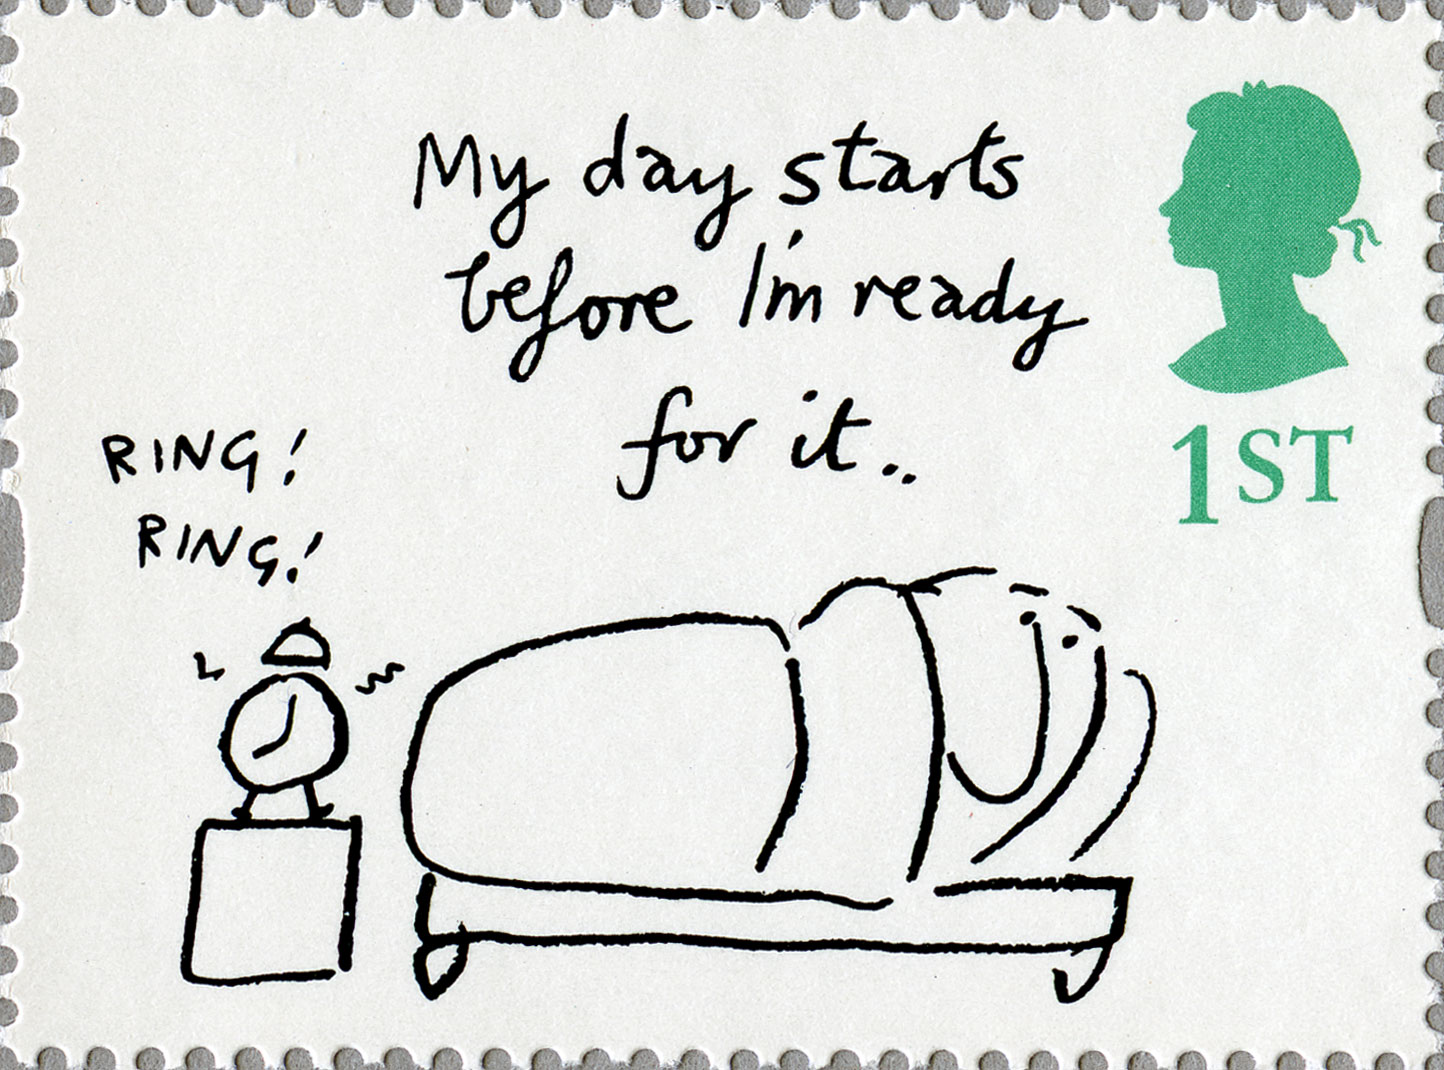 'My day starts before I'm ready for it' (Mel Calman)